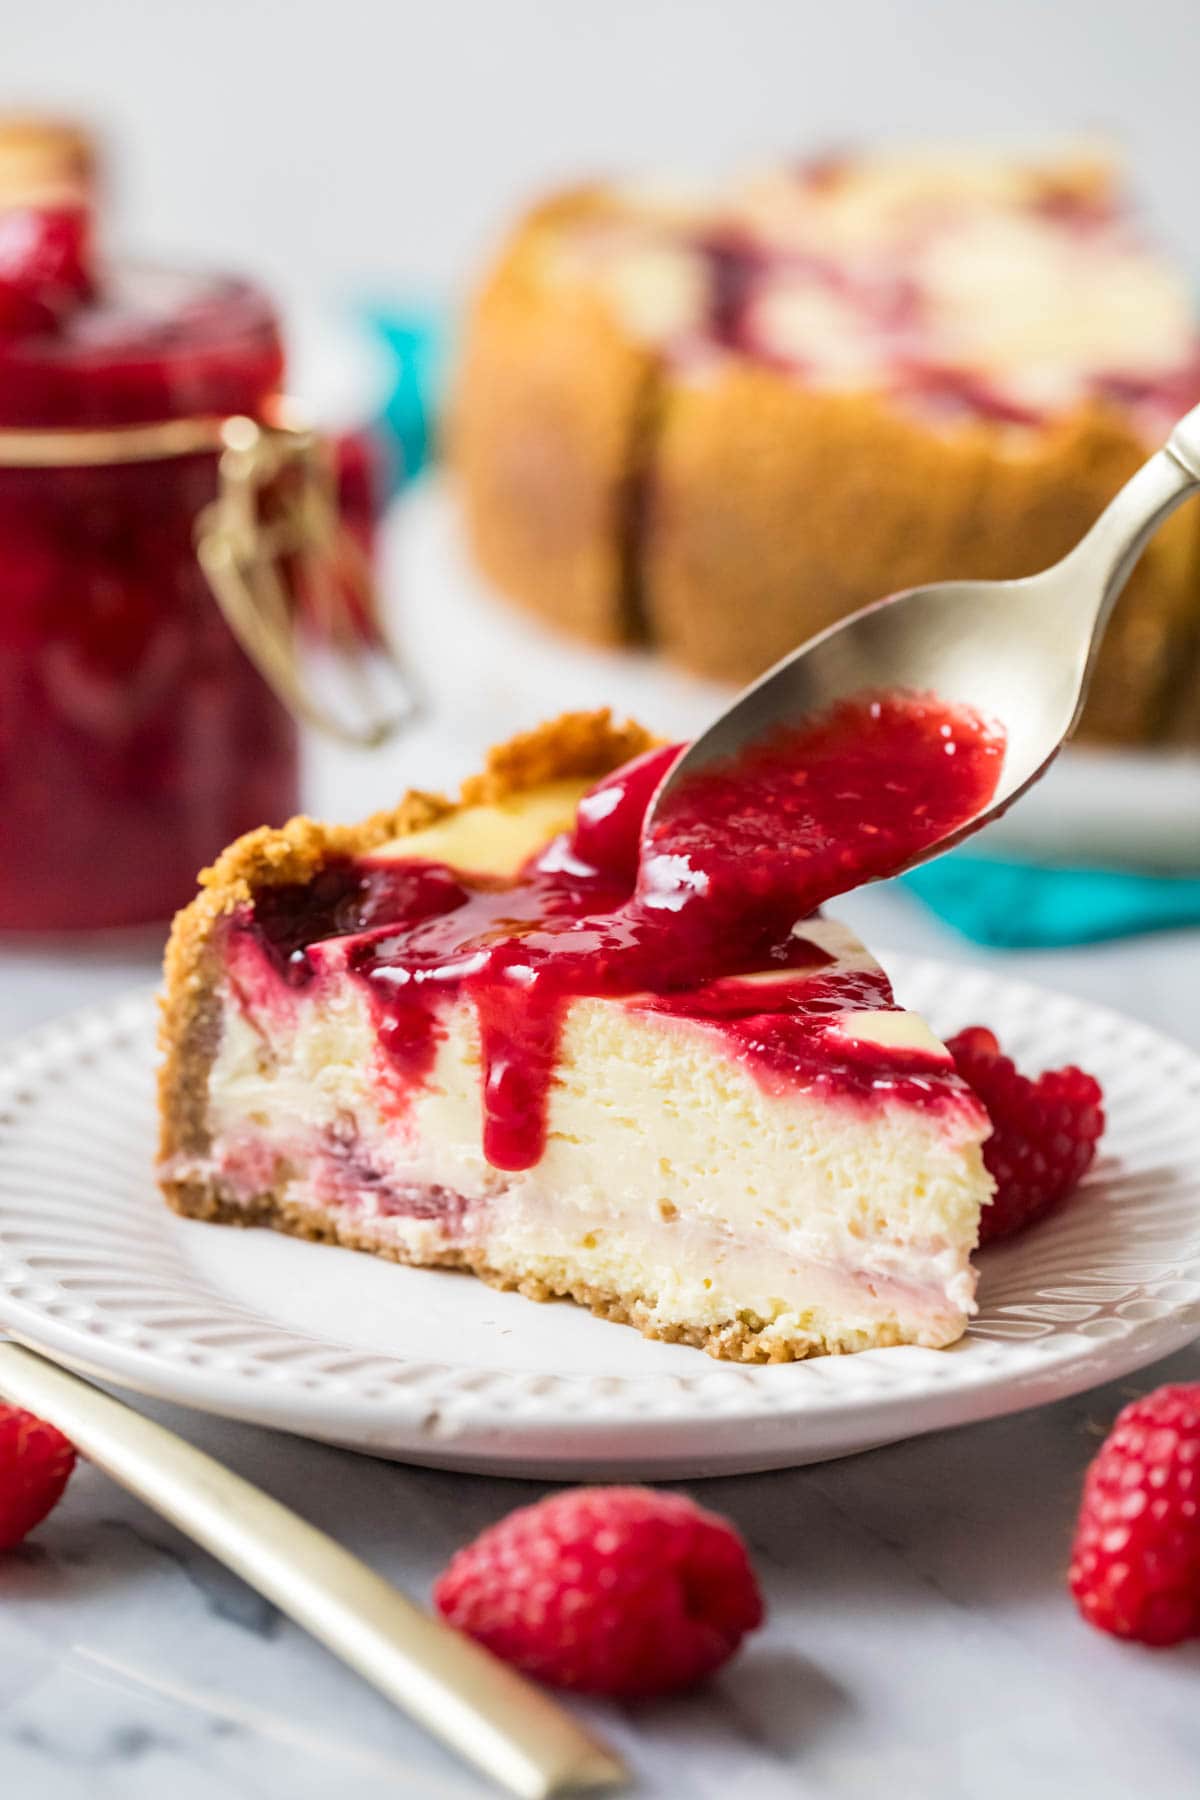 Raspberry sauce being poured over a slice of cheesecake.